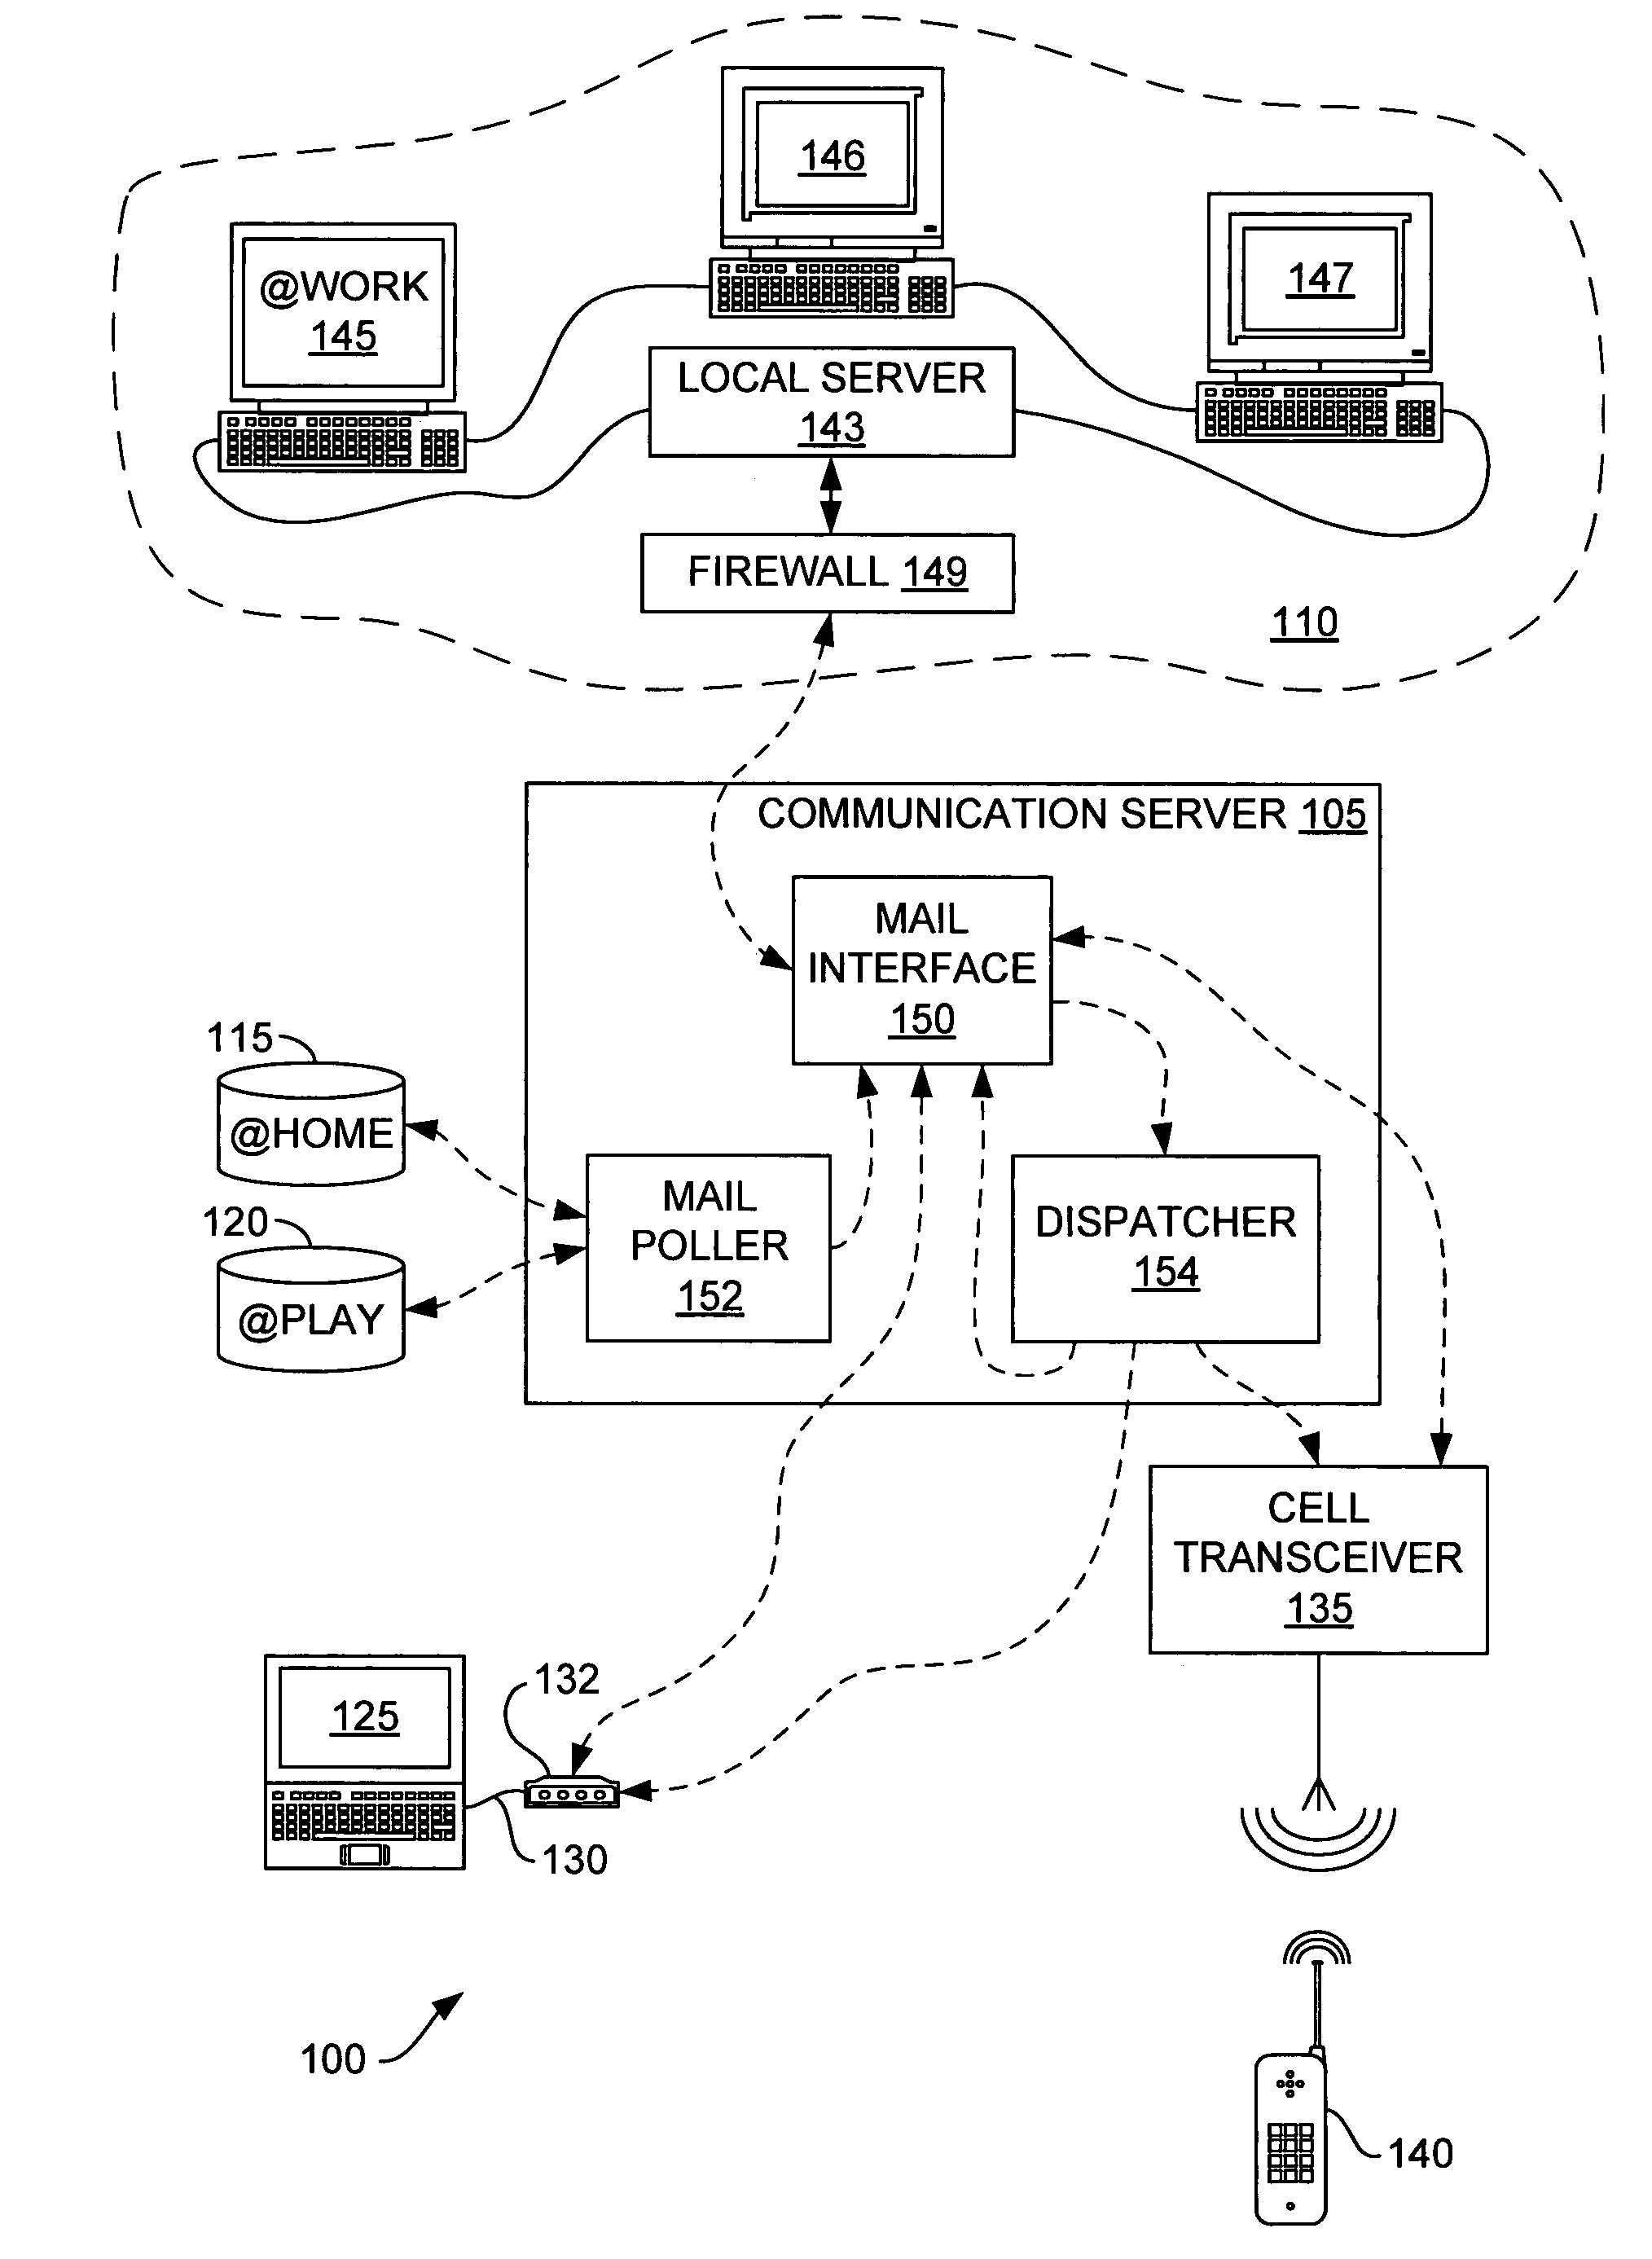 Methods and systems for filtering, sorting, and dispatching messages to wired and wireless devices